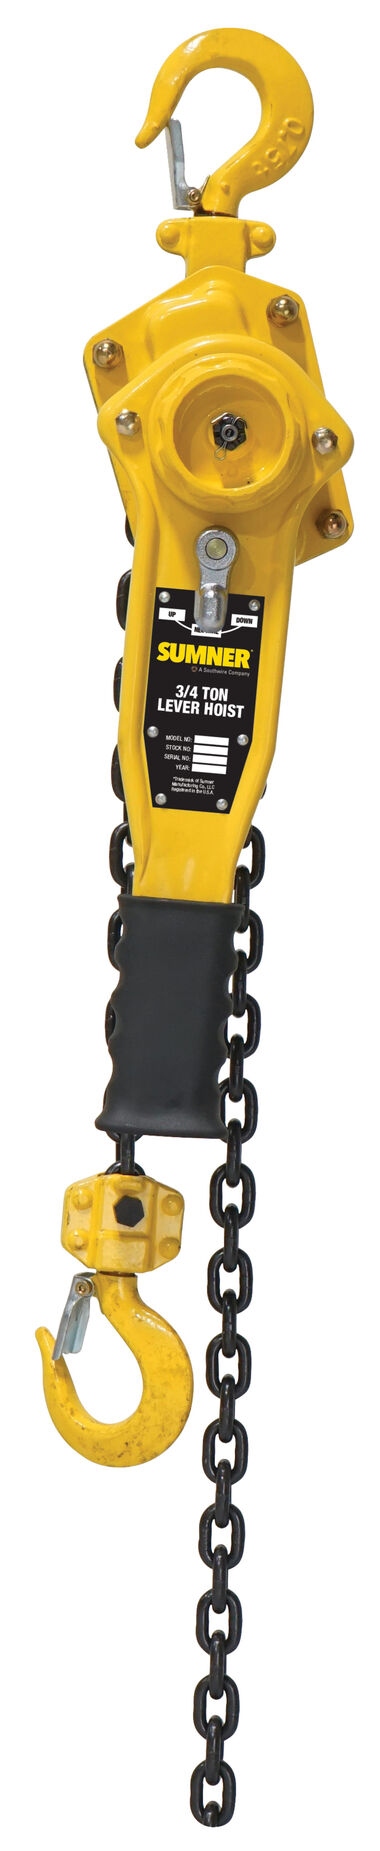 Sumner 3/4 Ton Lever Hoist with 15 ft. Chain Fall, large image number 1